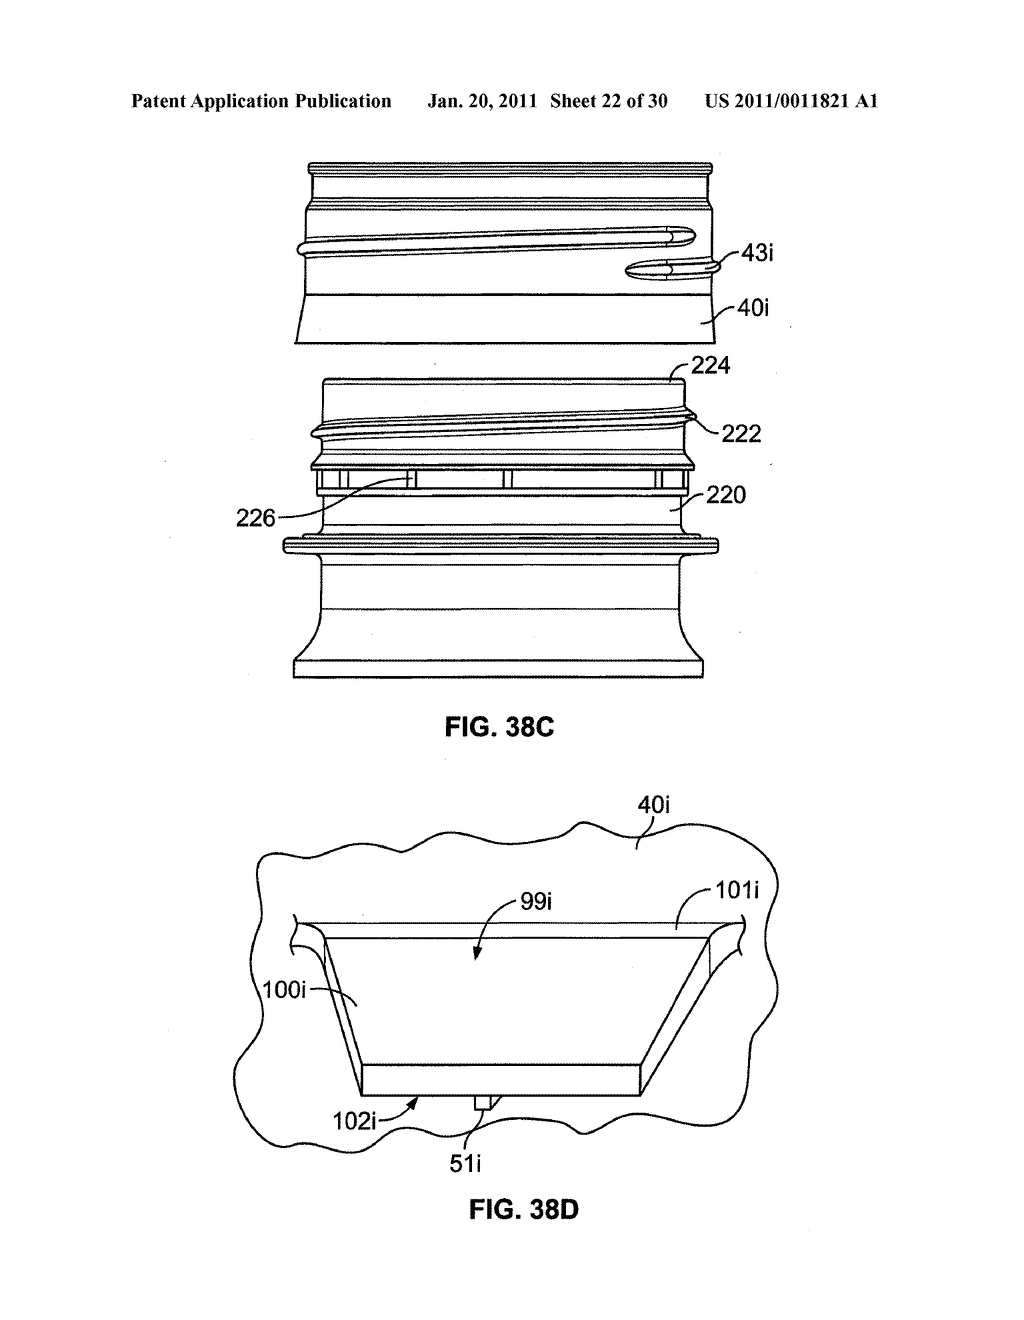 DESIGN AND MANUFACTURE OF REMOVABLE MEMBRANE SEALING COMPONENTS FOR CONSUMER PACKAGING - diagram, schematic, and image 23